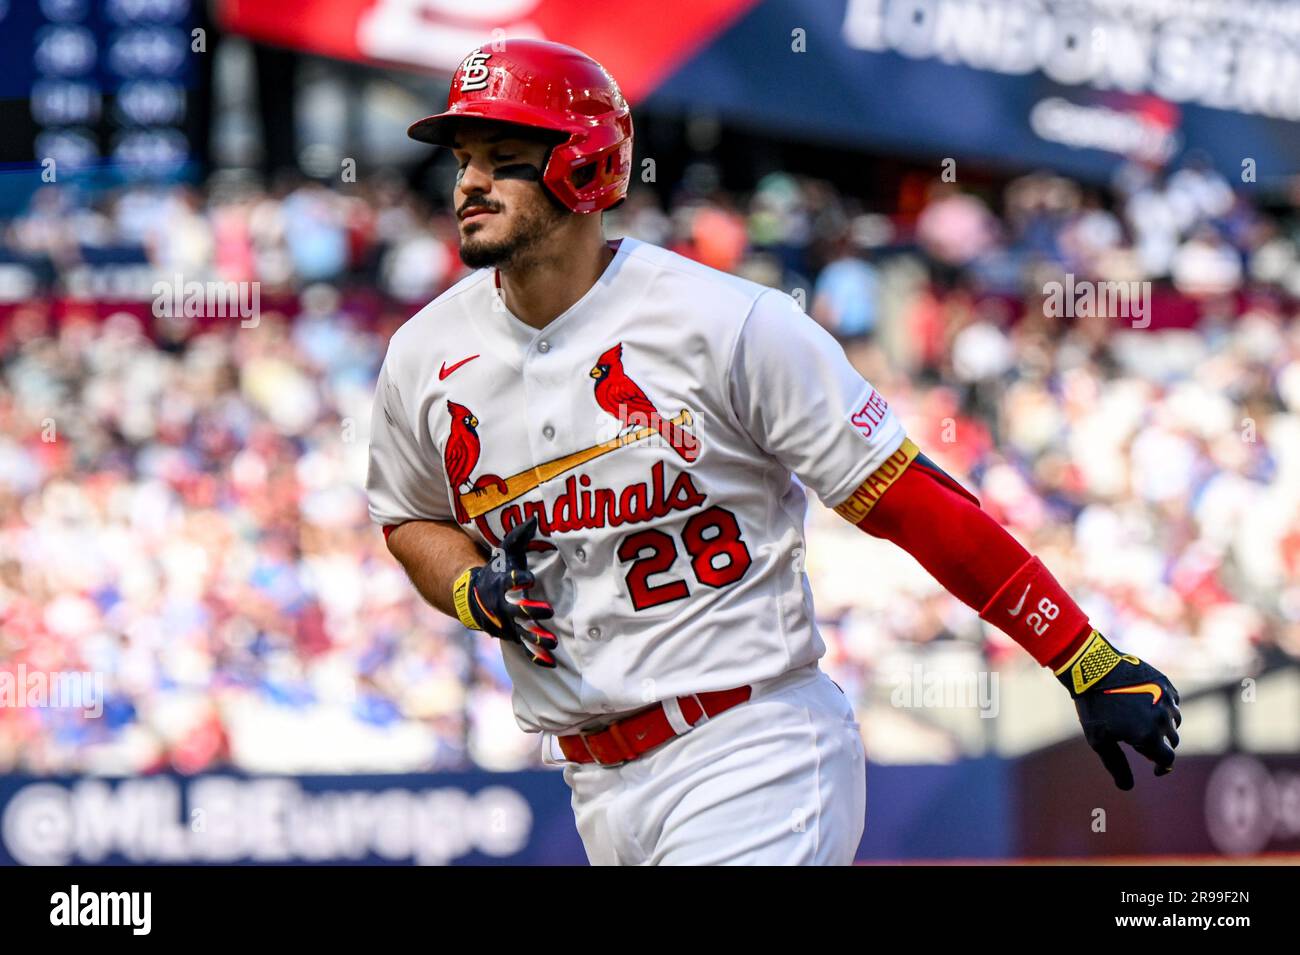 Nolan Arenado #28 of the St. Louis Cardinals during the 2023 MLB London  Series match St. Louis Cardinals vs Chicago Cubs at London Stadium, London,  United Kingdom, 25th June 2023 (Photo by